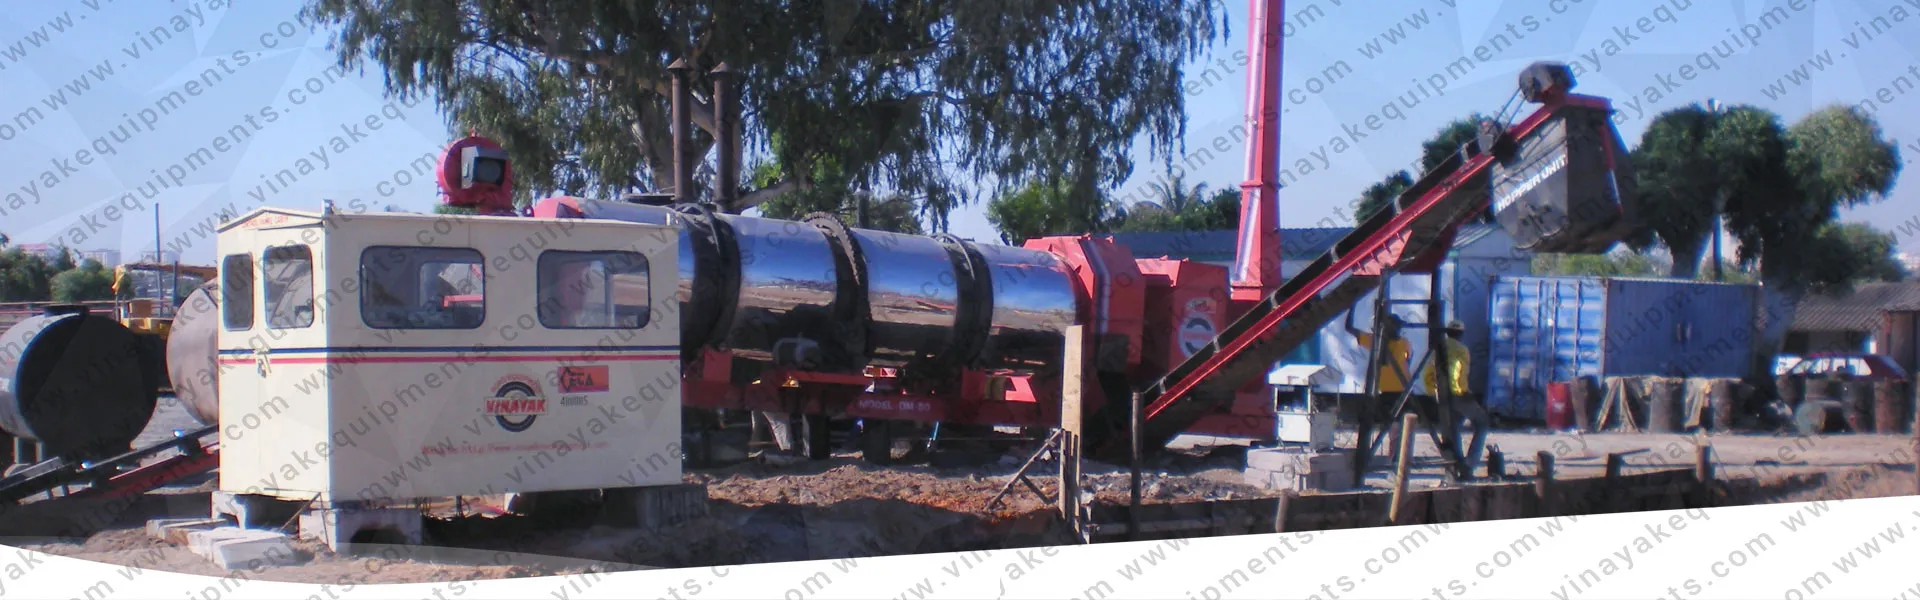 Asphalt Drum Mixing Plant Exporters from india, sauth africa, malaysia